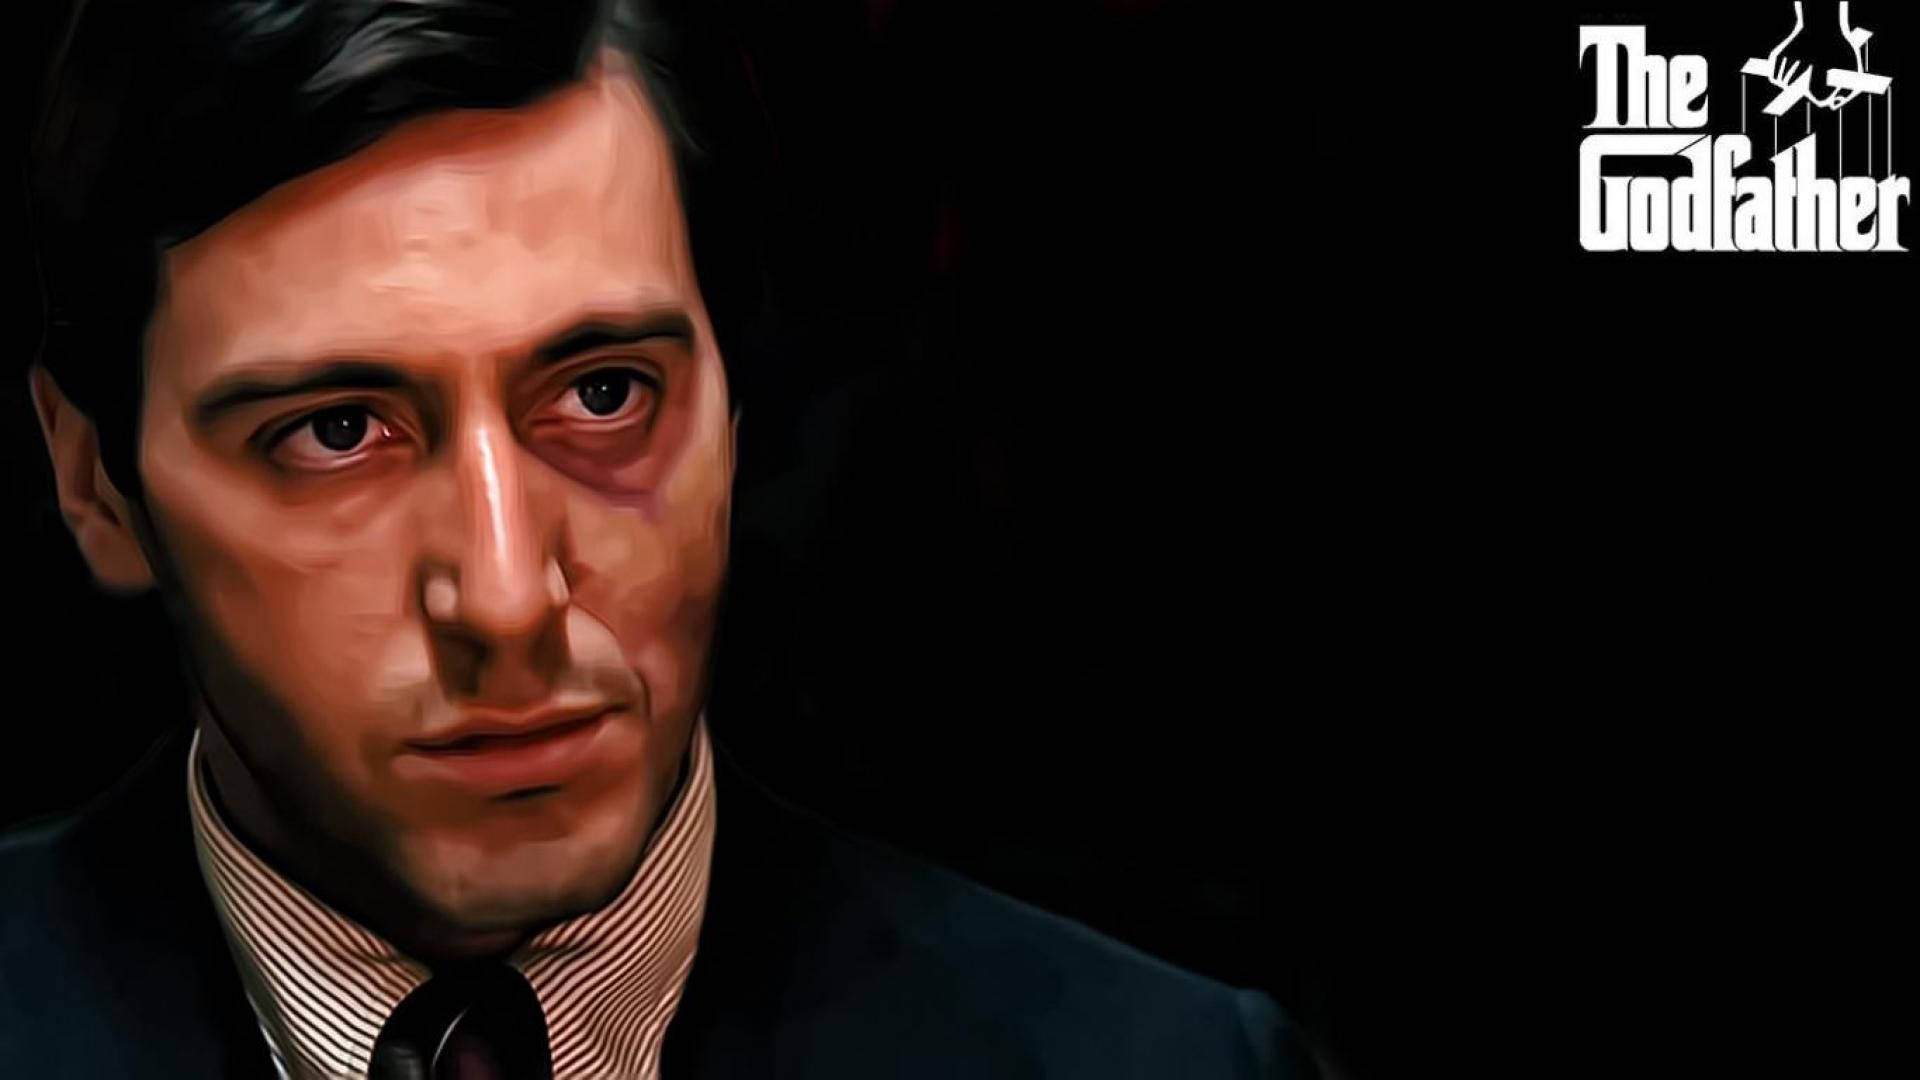 Al Pacino Godfather Painting Background